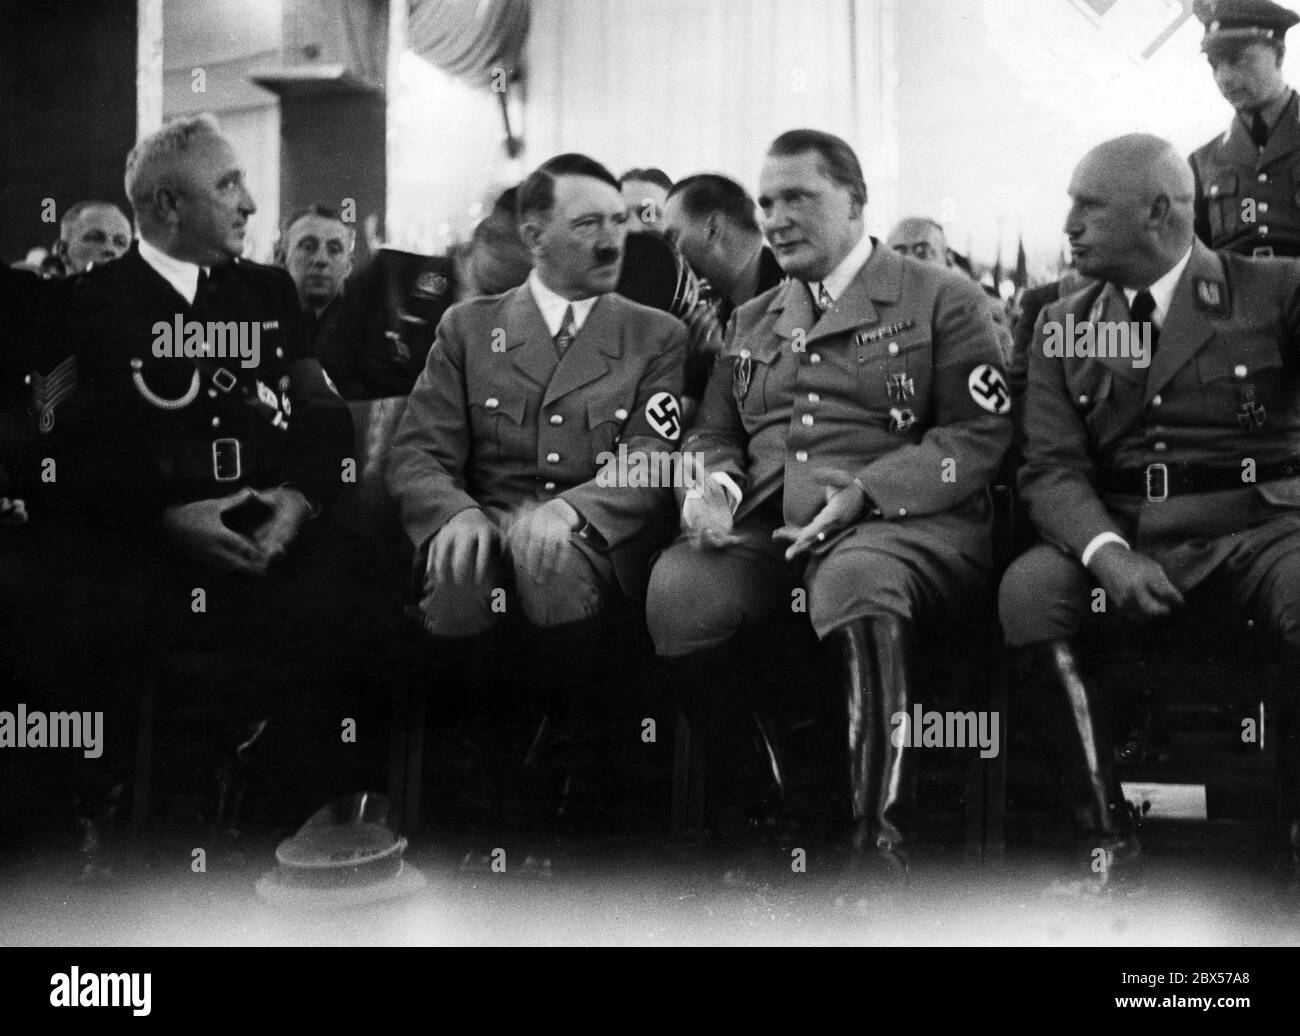 The 5th annual conference of the German Labour Front takes place in Nuremberg's Luitpoldhalle during the Reich Party Congress of Labour. The event was attended, among others, by (from left to right): Robert Ley, Adolf Hitler, Hermann Goering and Julius Streicher. Stock Photo